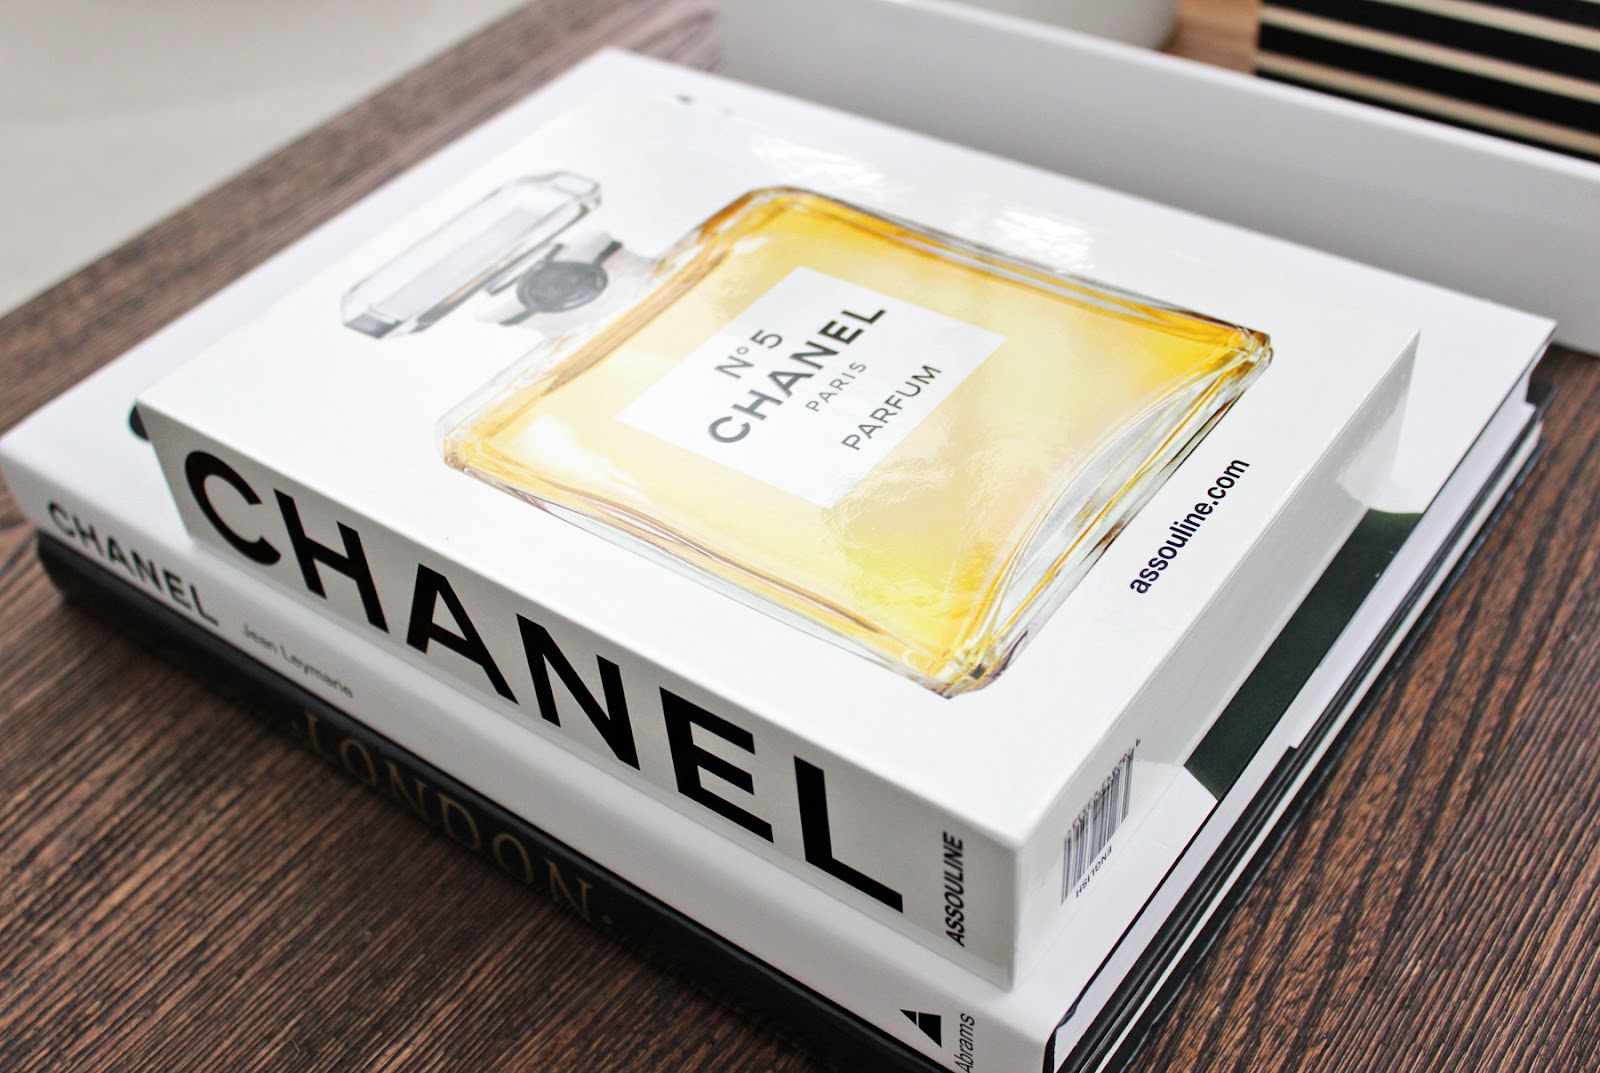 Chanel Coffee Table Book Price - Chanel Coffee Table Book | Immy + Indi